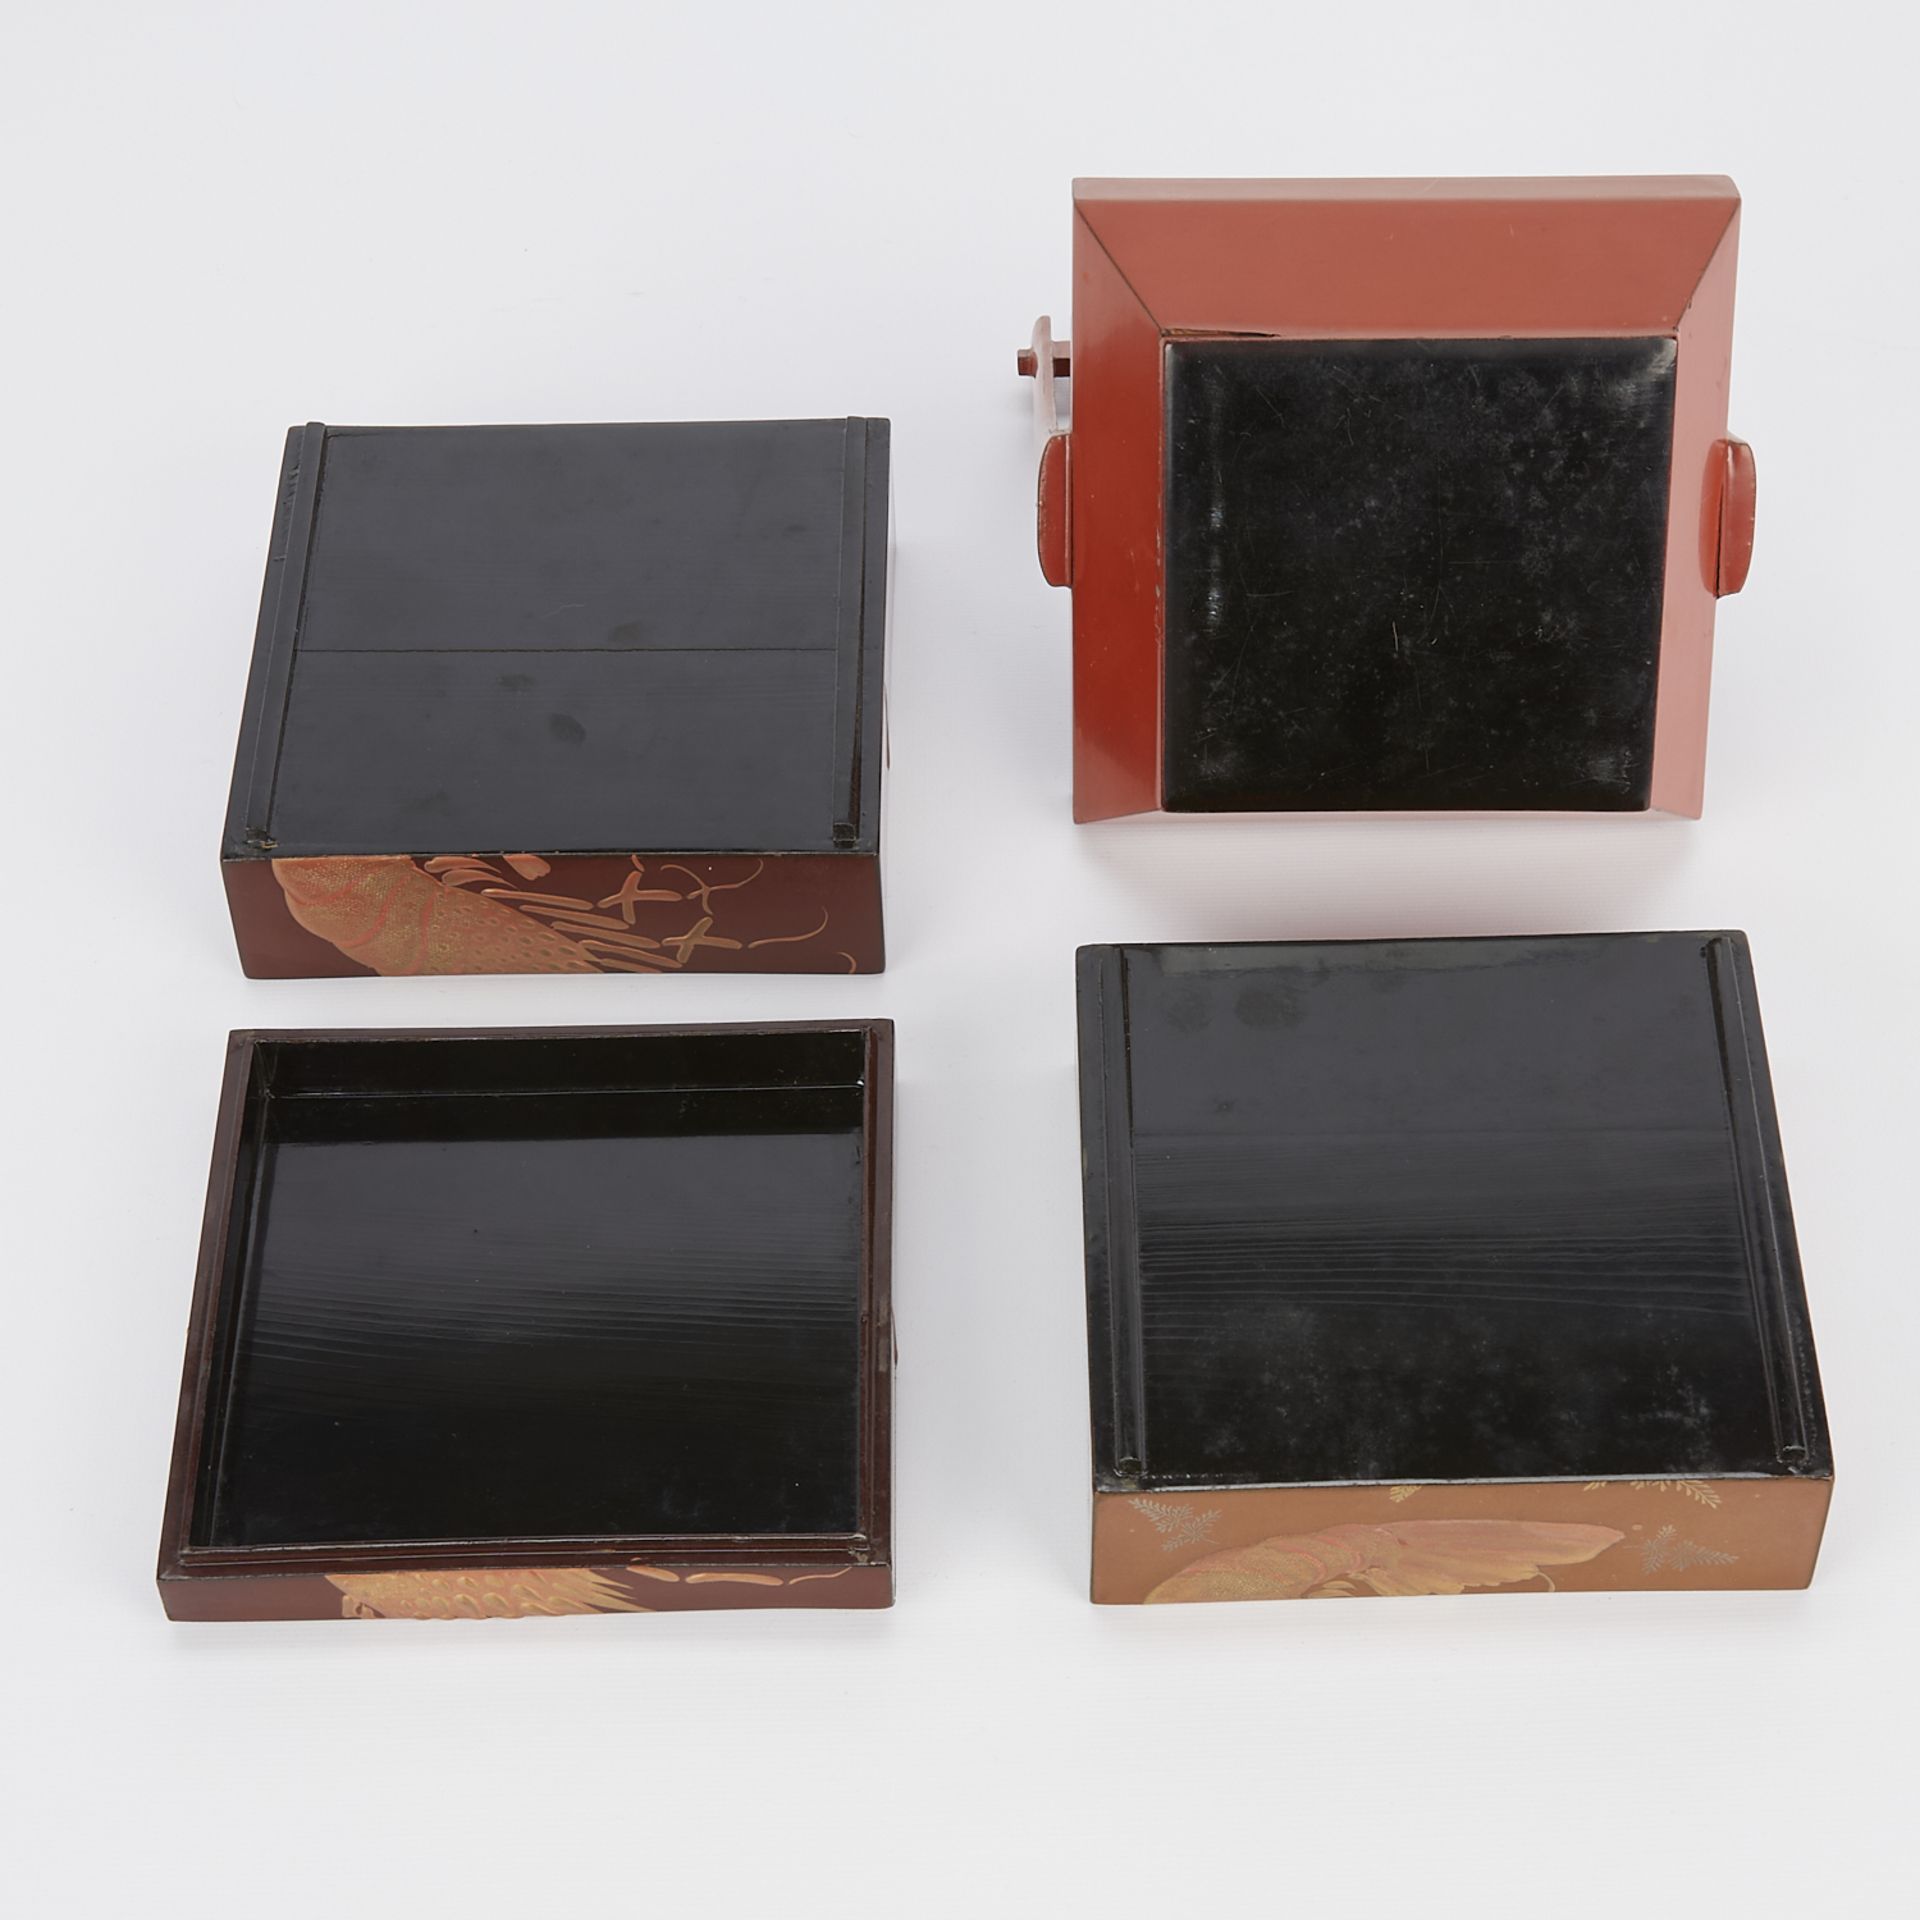 2 Japanese Lacquerware Boxes w/ Crustaceans - Image 15 of 17